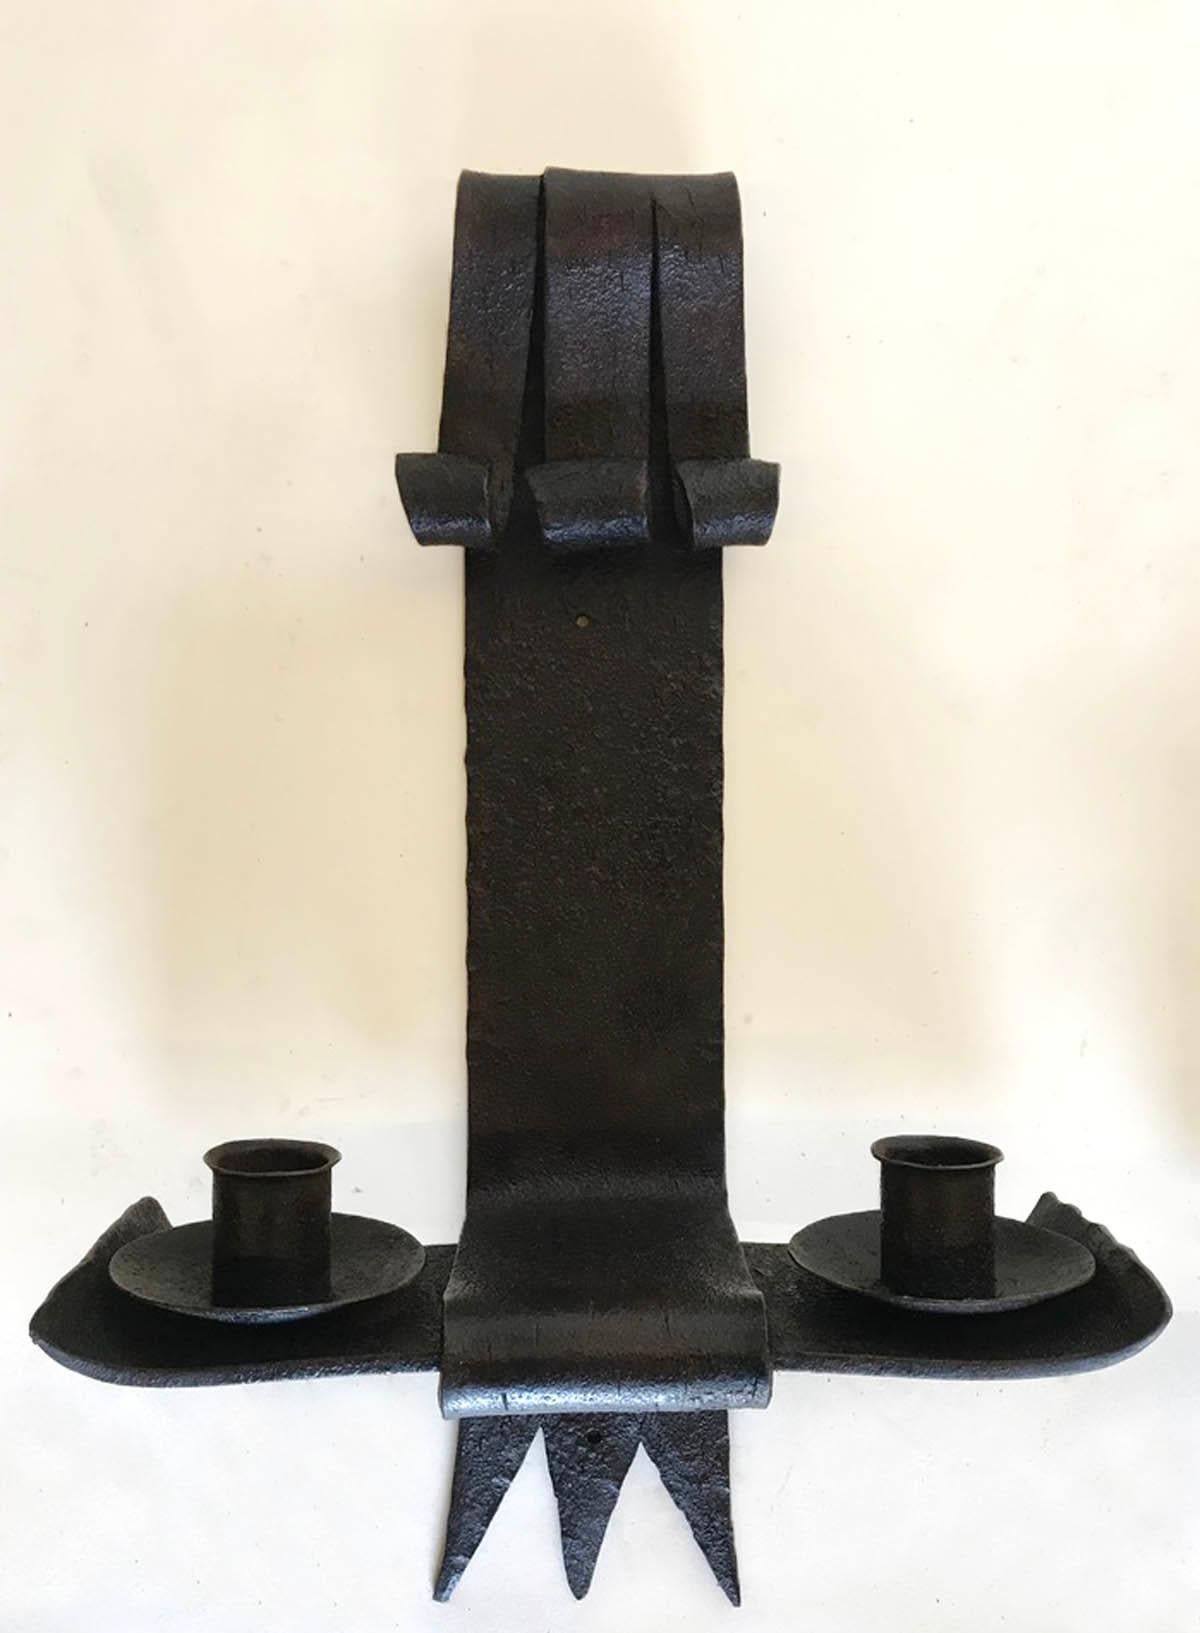 Pair of handwrought iron sconces with two arms each. You can place a candle or have them electrified. Dark patina. Strong profile.